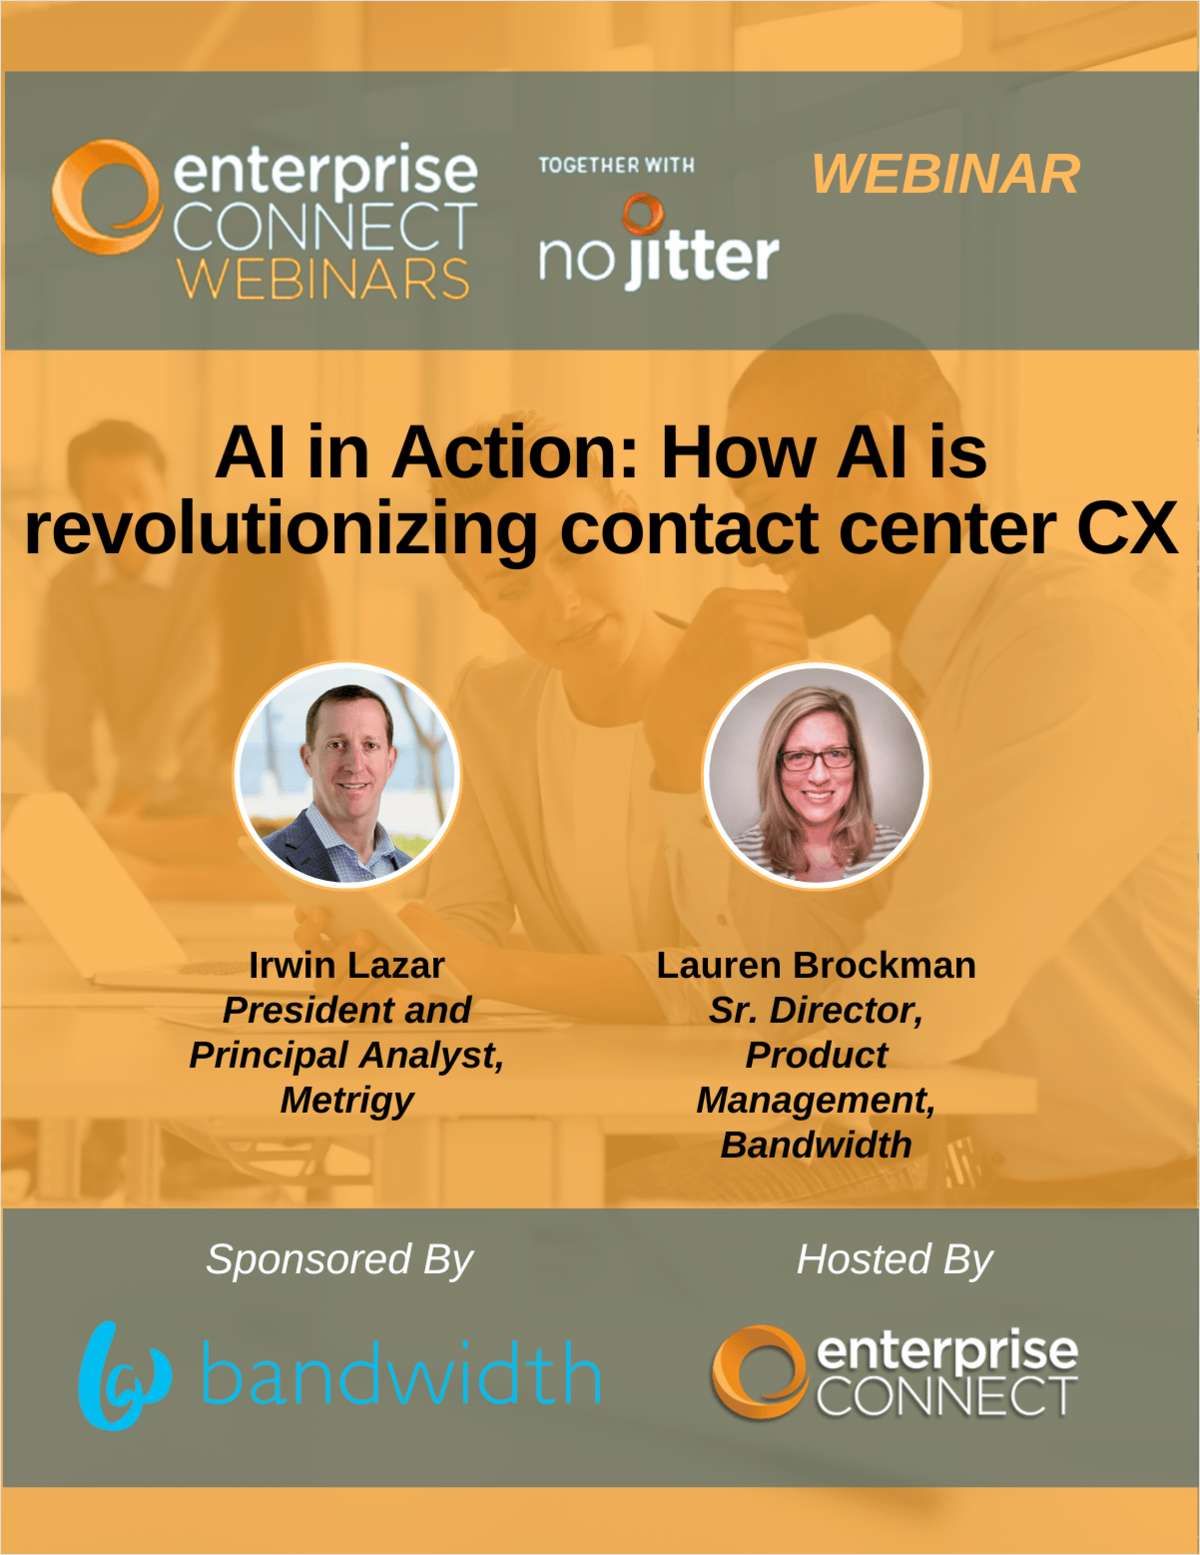 AI in Action: How AI is revolutionizing contact center CX